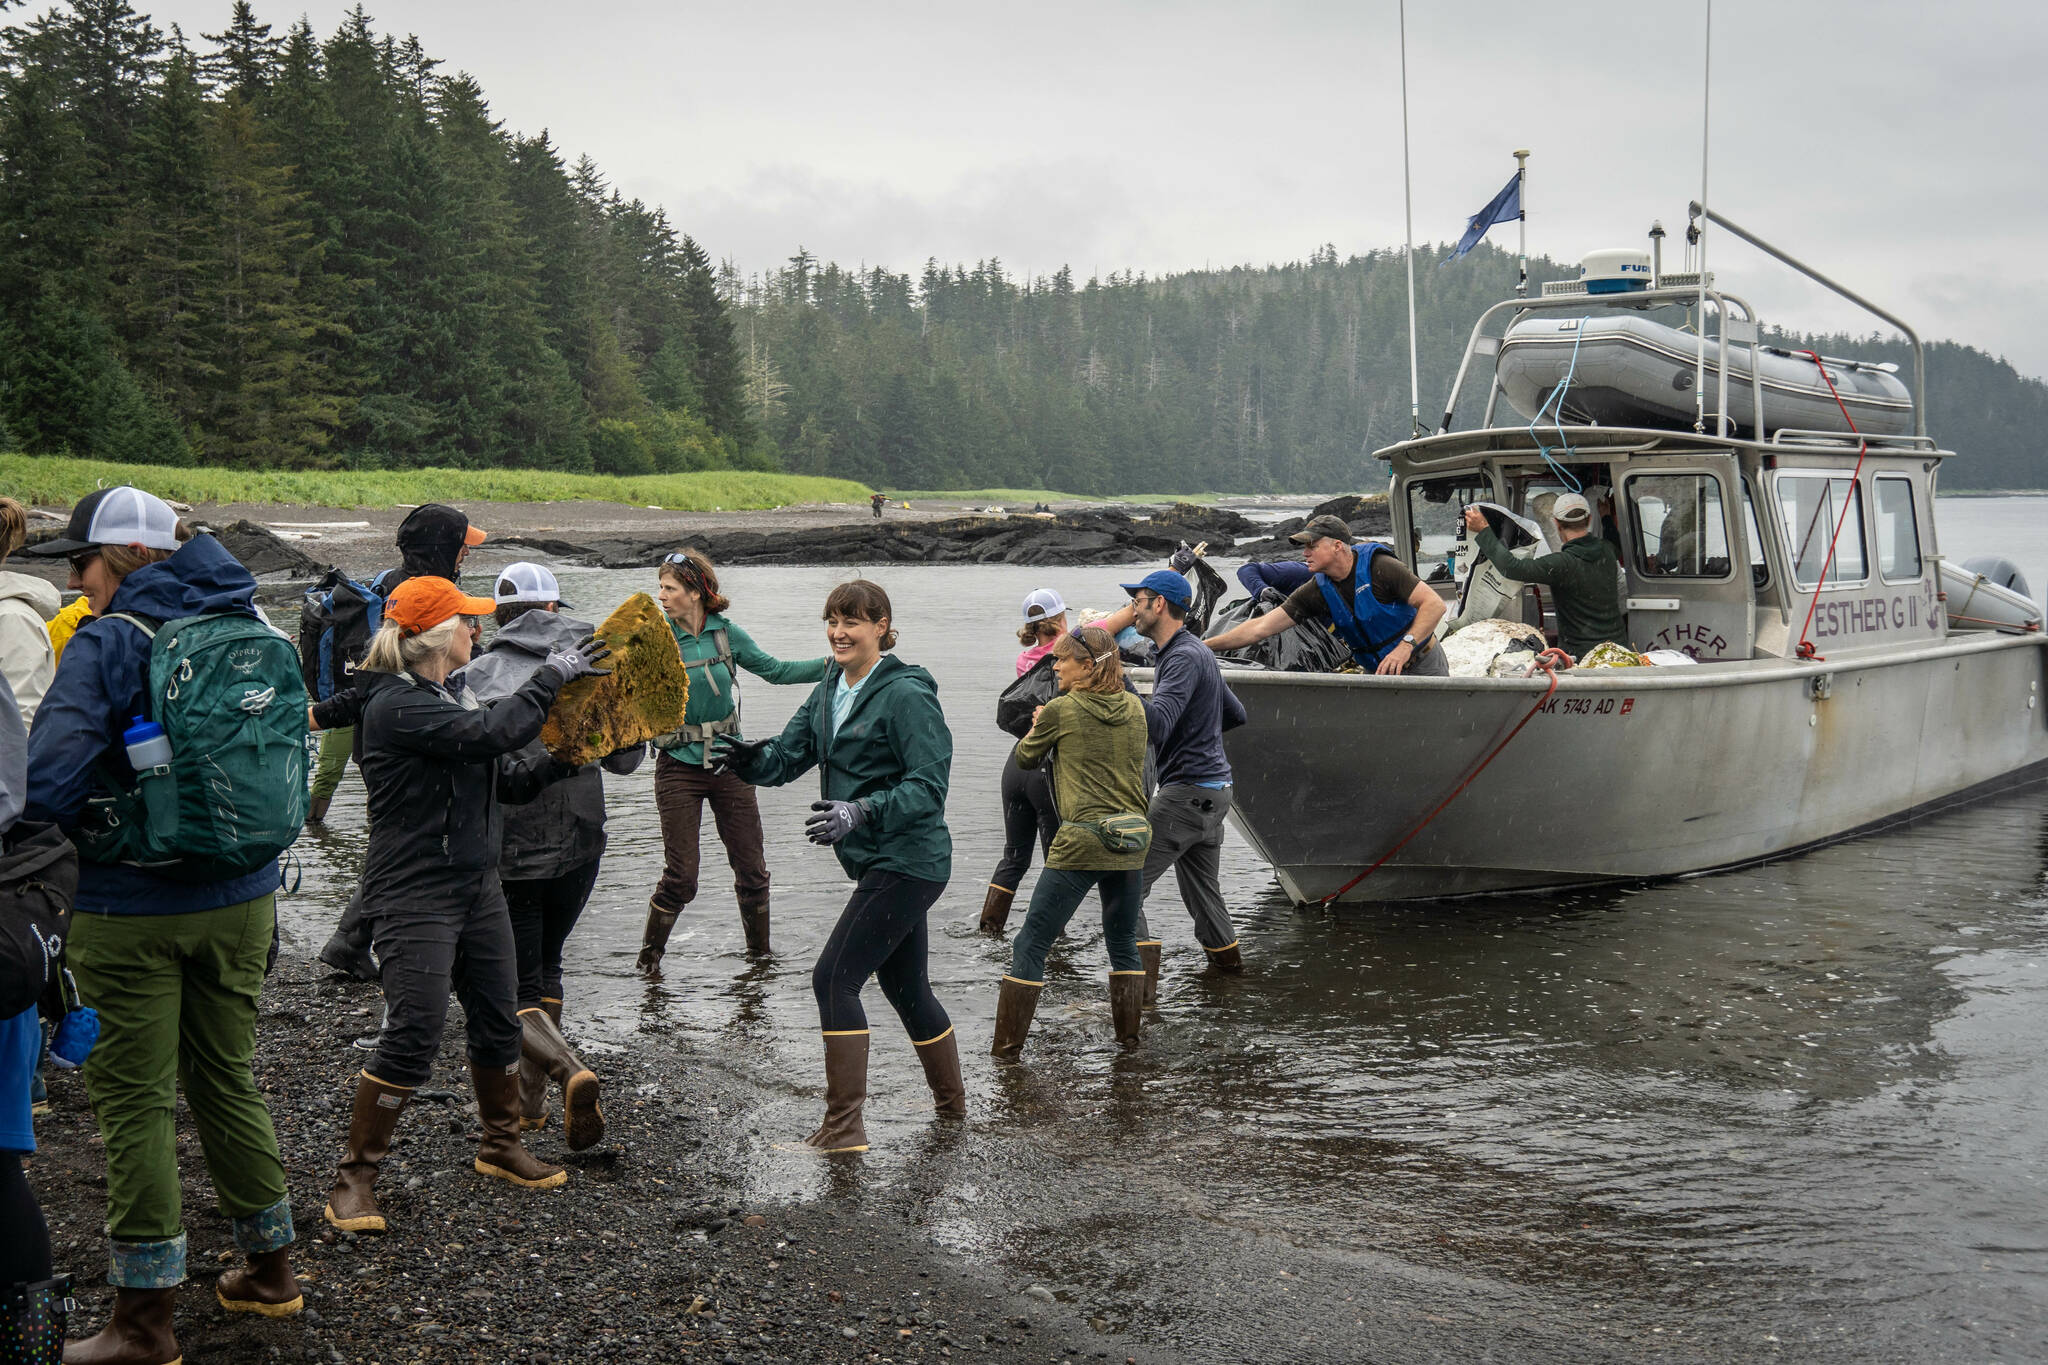 More than 40 volunteers from a range of organizations including congressional members, tribal governments, environmental organizations, visiting social media influencers and more worked side-by-side removing 1,400 pounds of trash from coasts near Sitka in August. (Ryan Morse / Sitka Conservation Society)